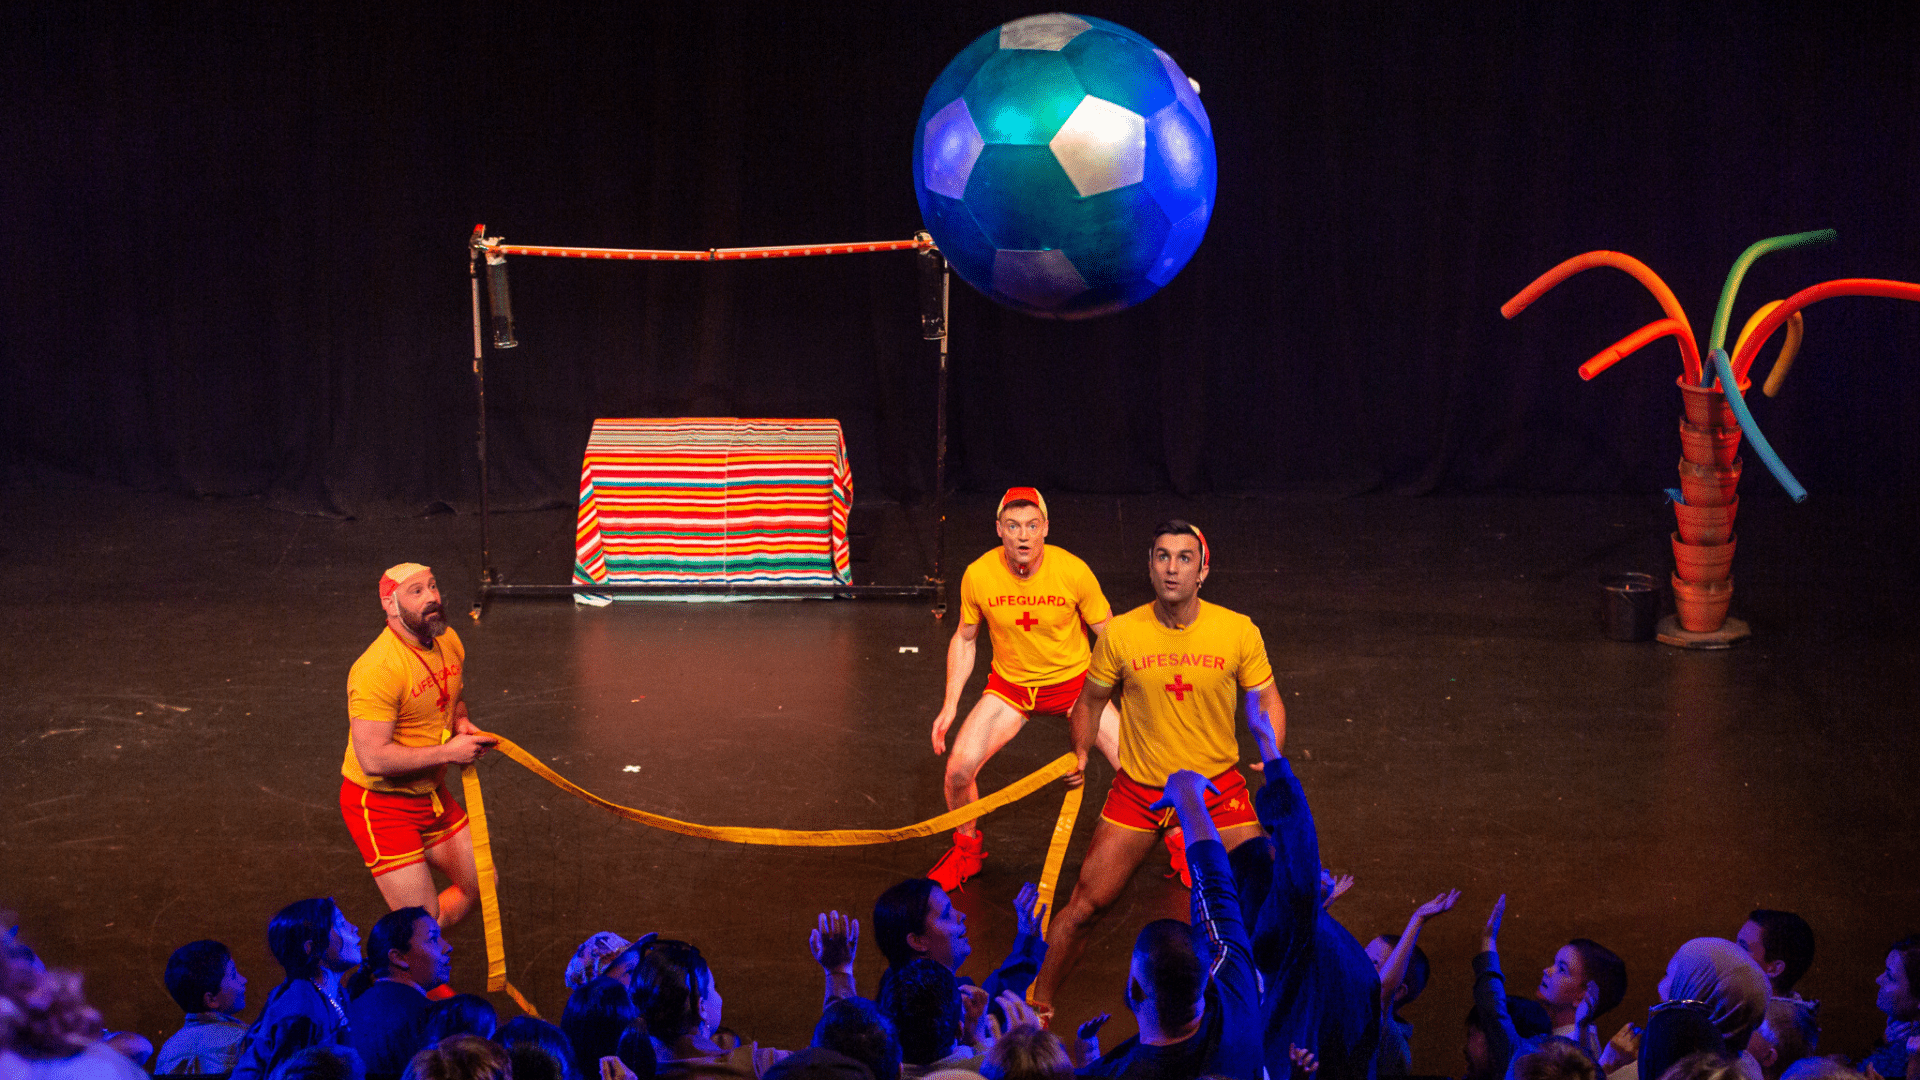 Splash Test Dummies production photo - The Dummies performing on stage, wearing yellow and red lifeguard outfits. They are stood in front of a packed crowd watching a giant beach ball in the air above the audience.